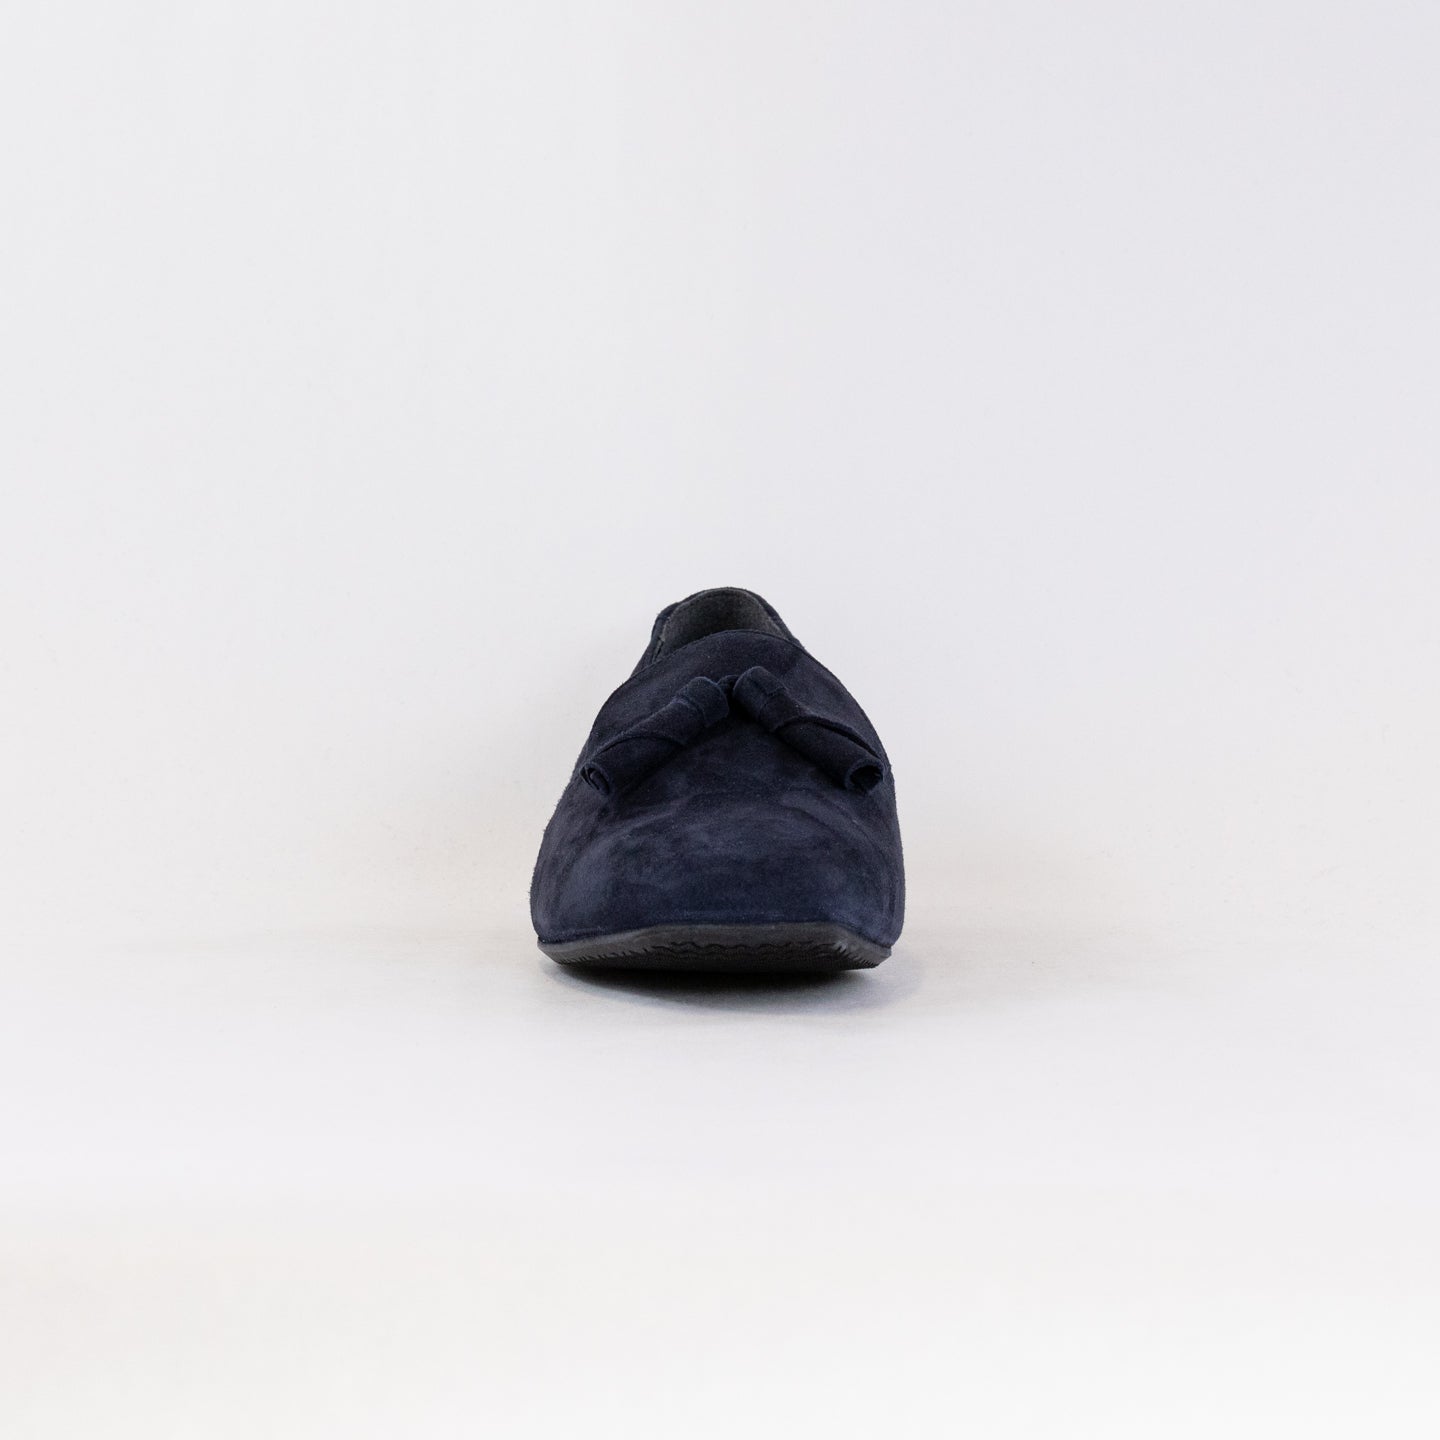 Eric Michael Rana Loafer (Women's) - Navy Suede